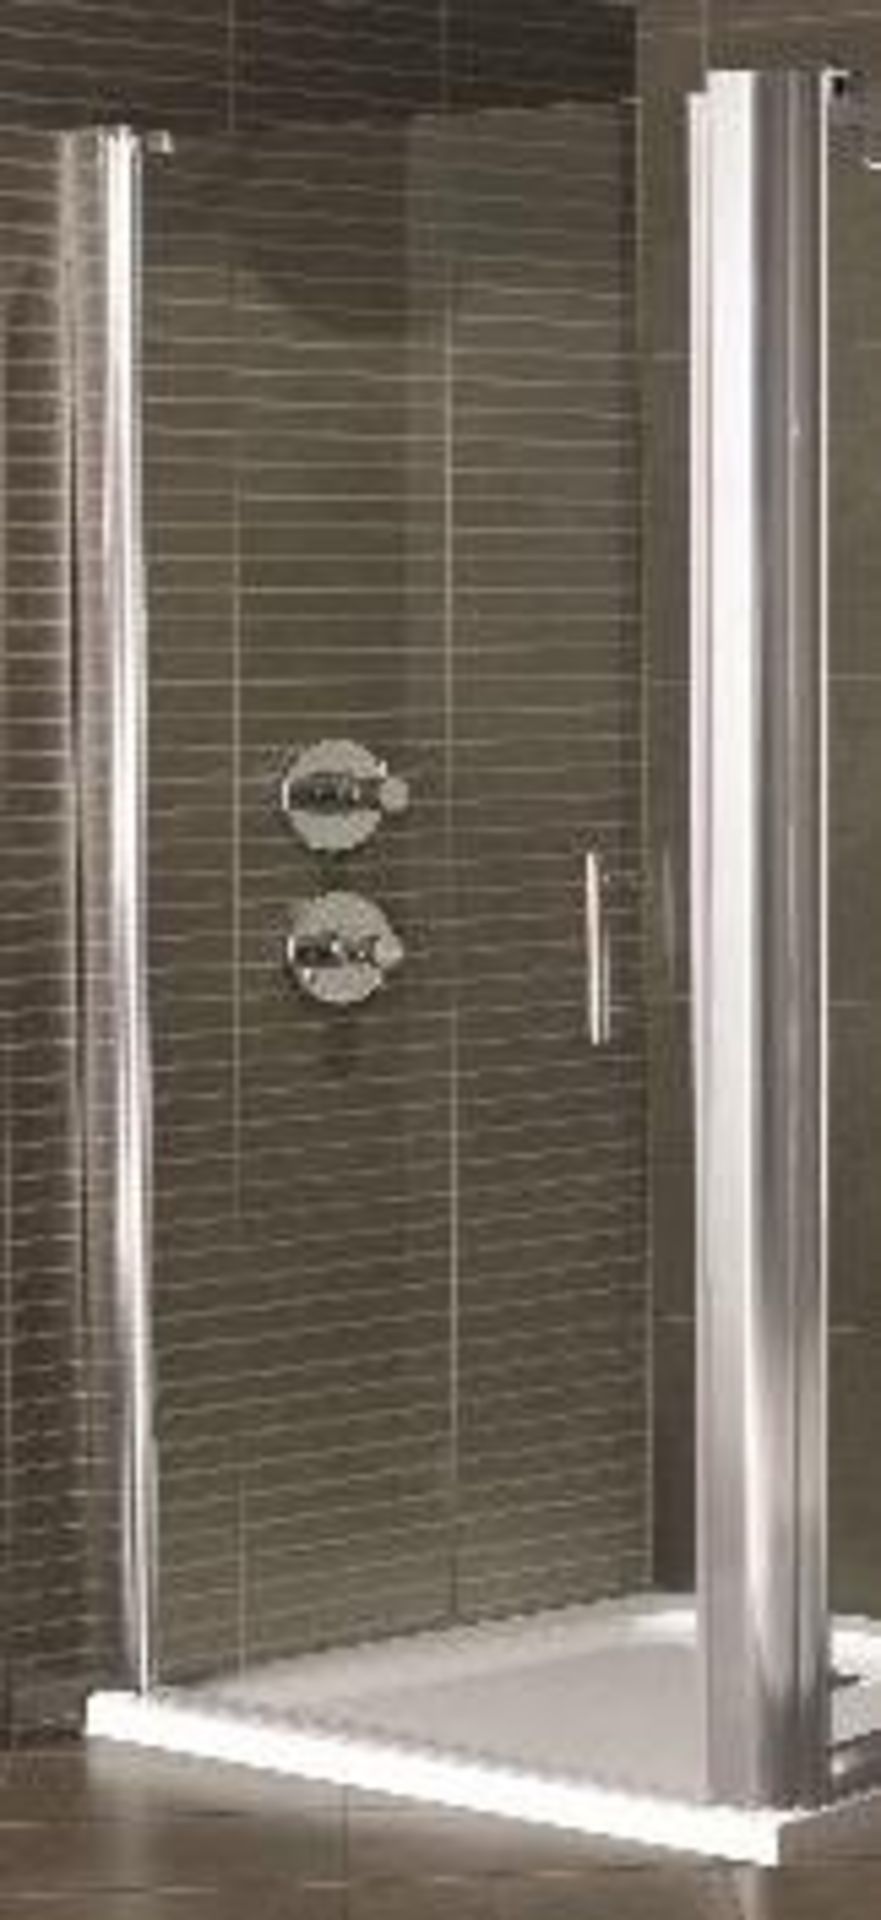 1 x Vogue Bathrooms Sulis 760mm Hinged Shower Door - 1850mm Height - 6mm Clear Glass - Chrome T